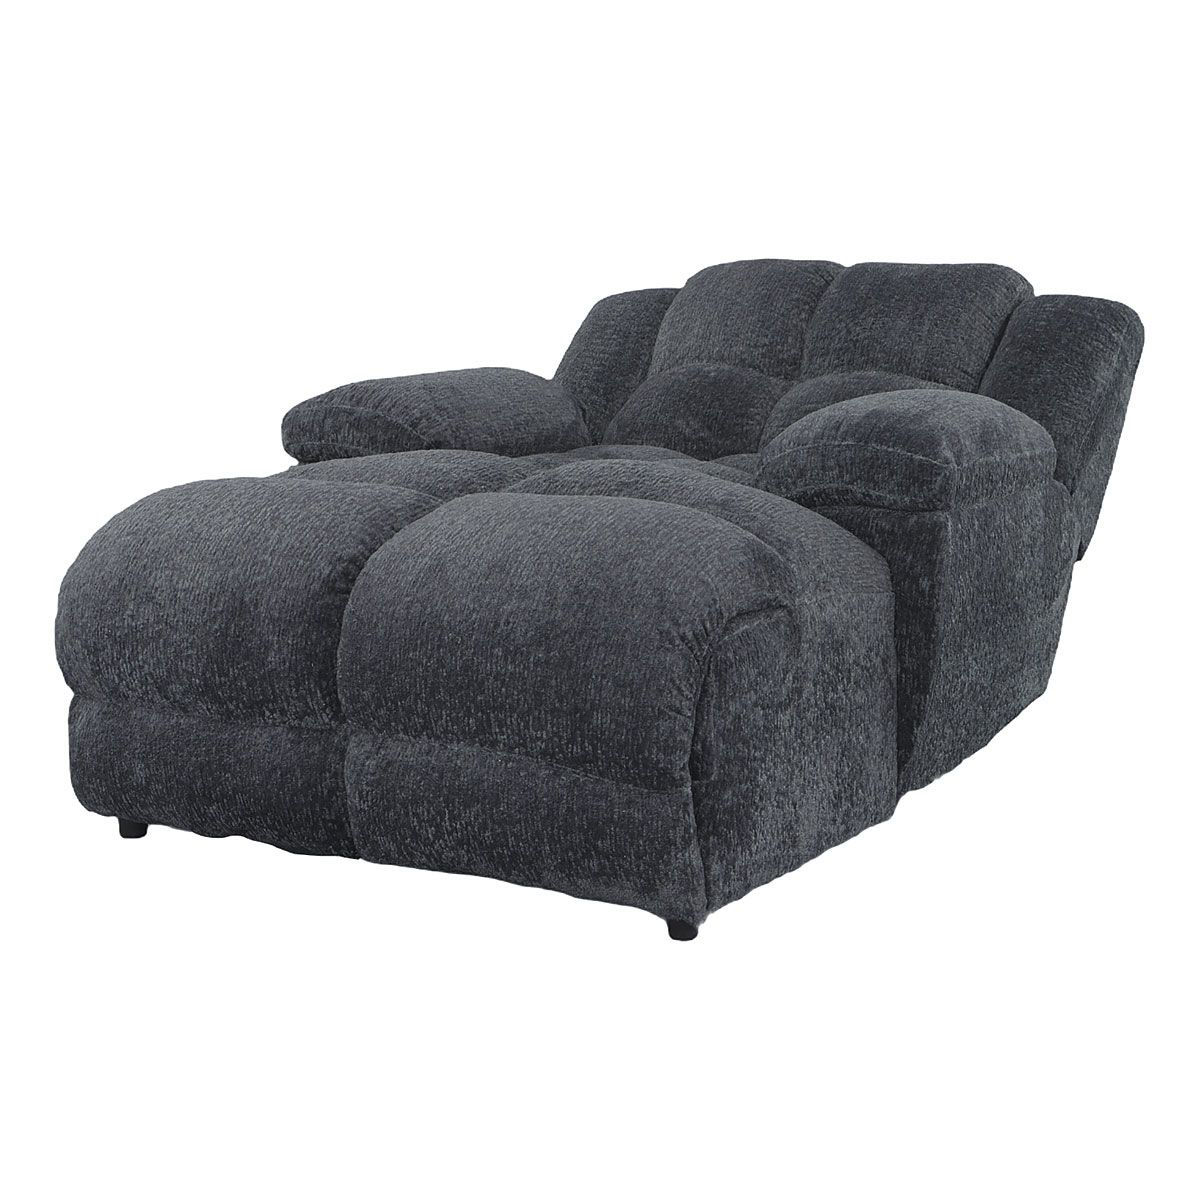 Lockley Reclining Chaise Bad Home